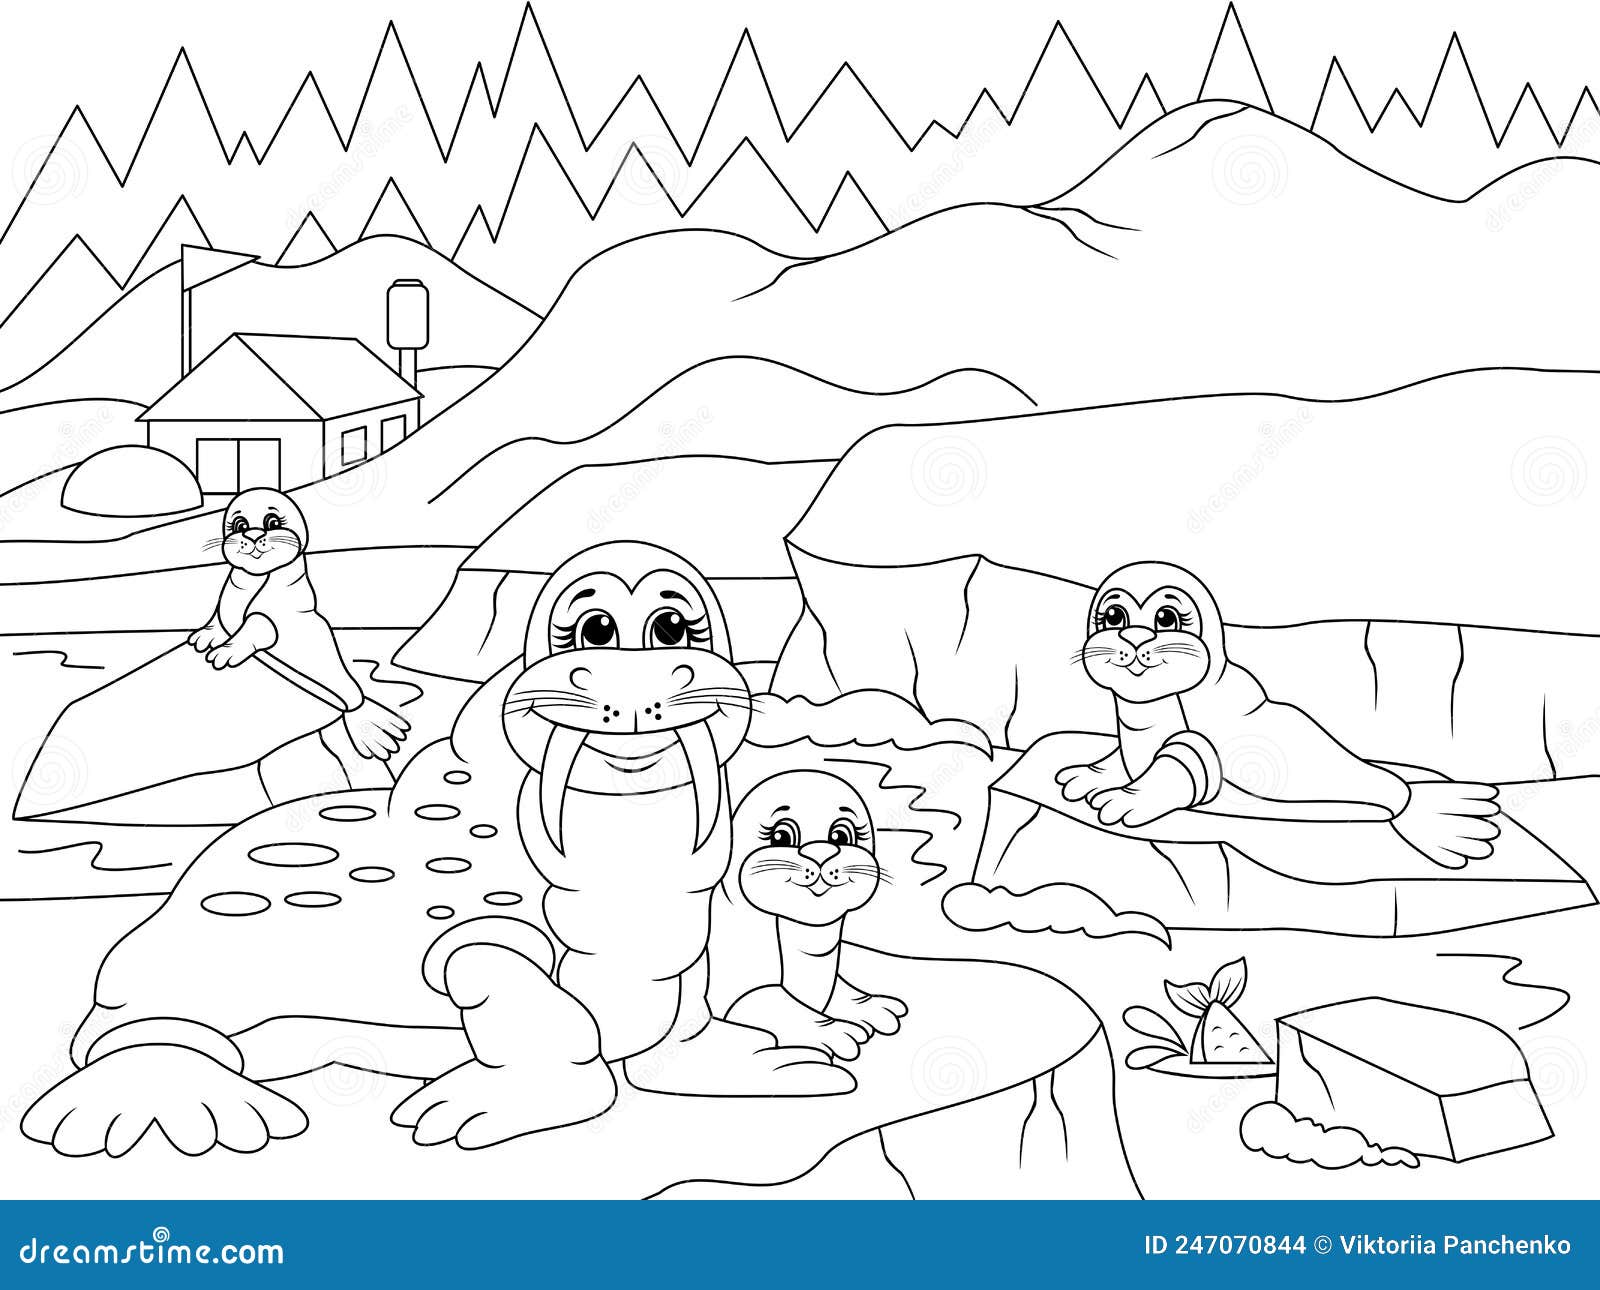 A family of walrus at the north pole mom and child landscape coloring book stock vector